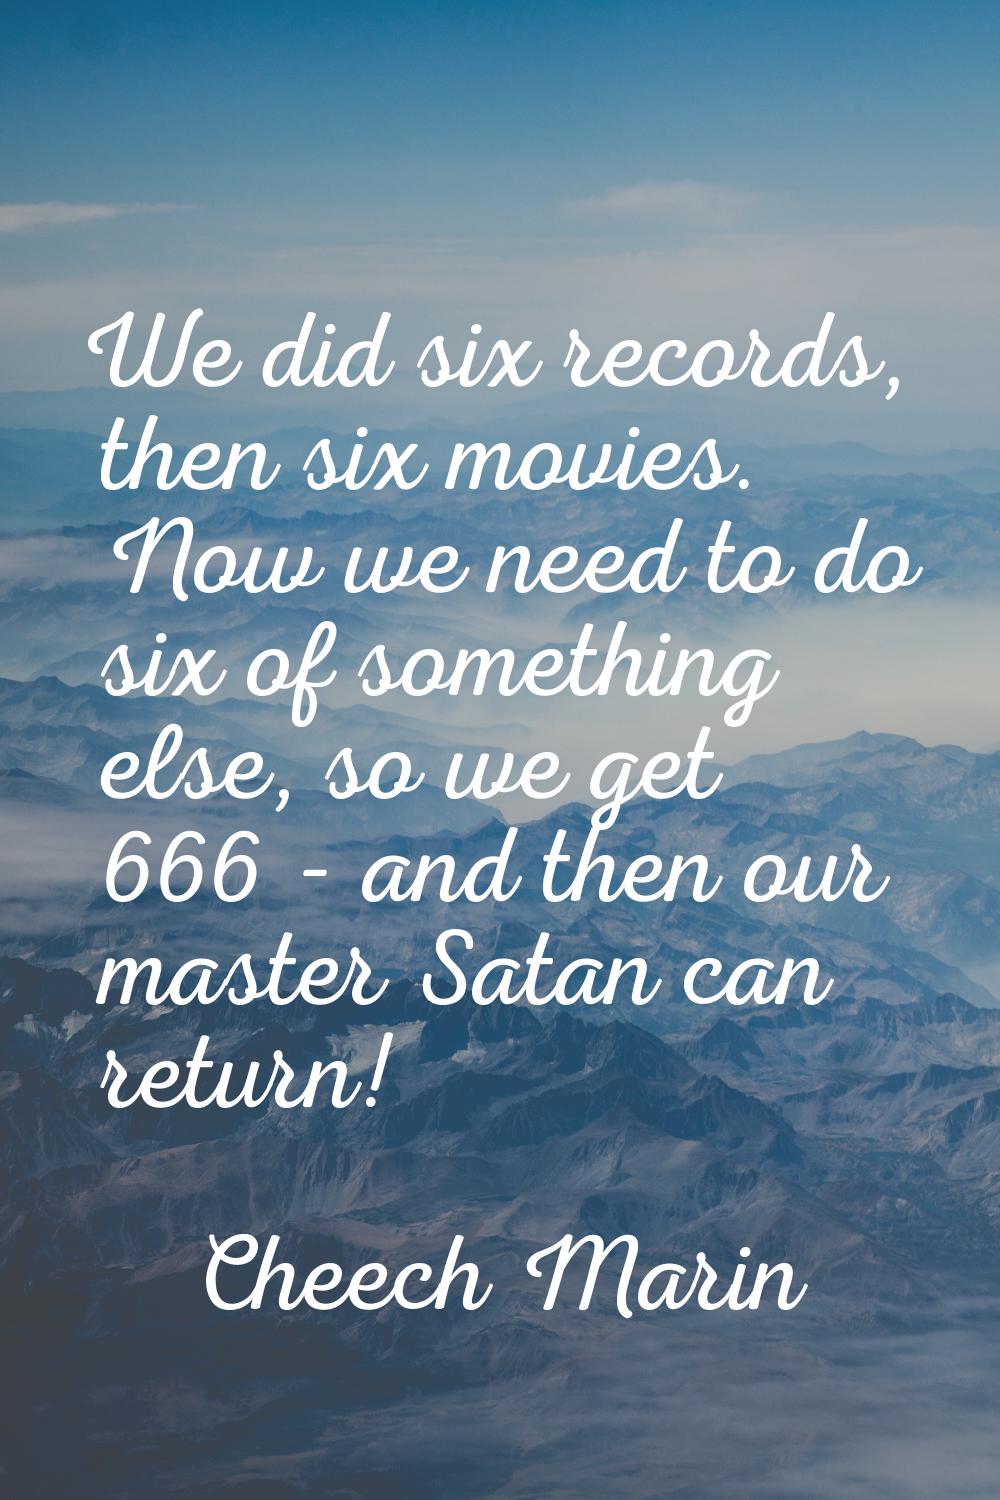 We did six records, then six movies. Now we need to do six of something else, so we get 666 - and t